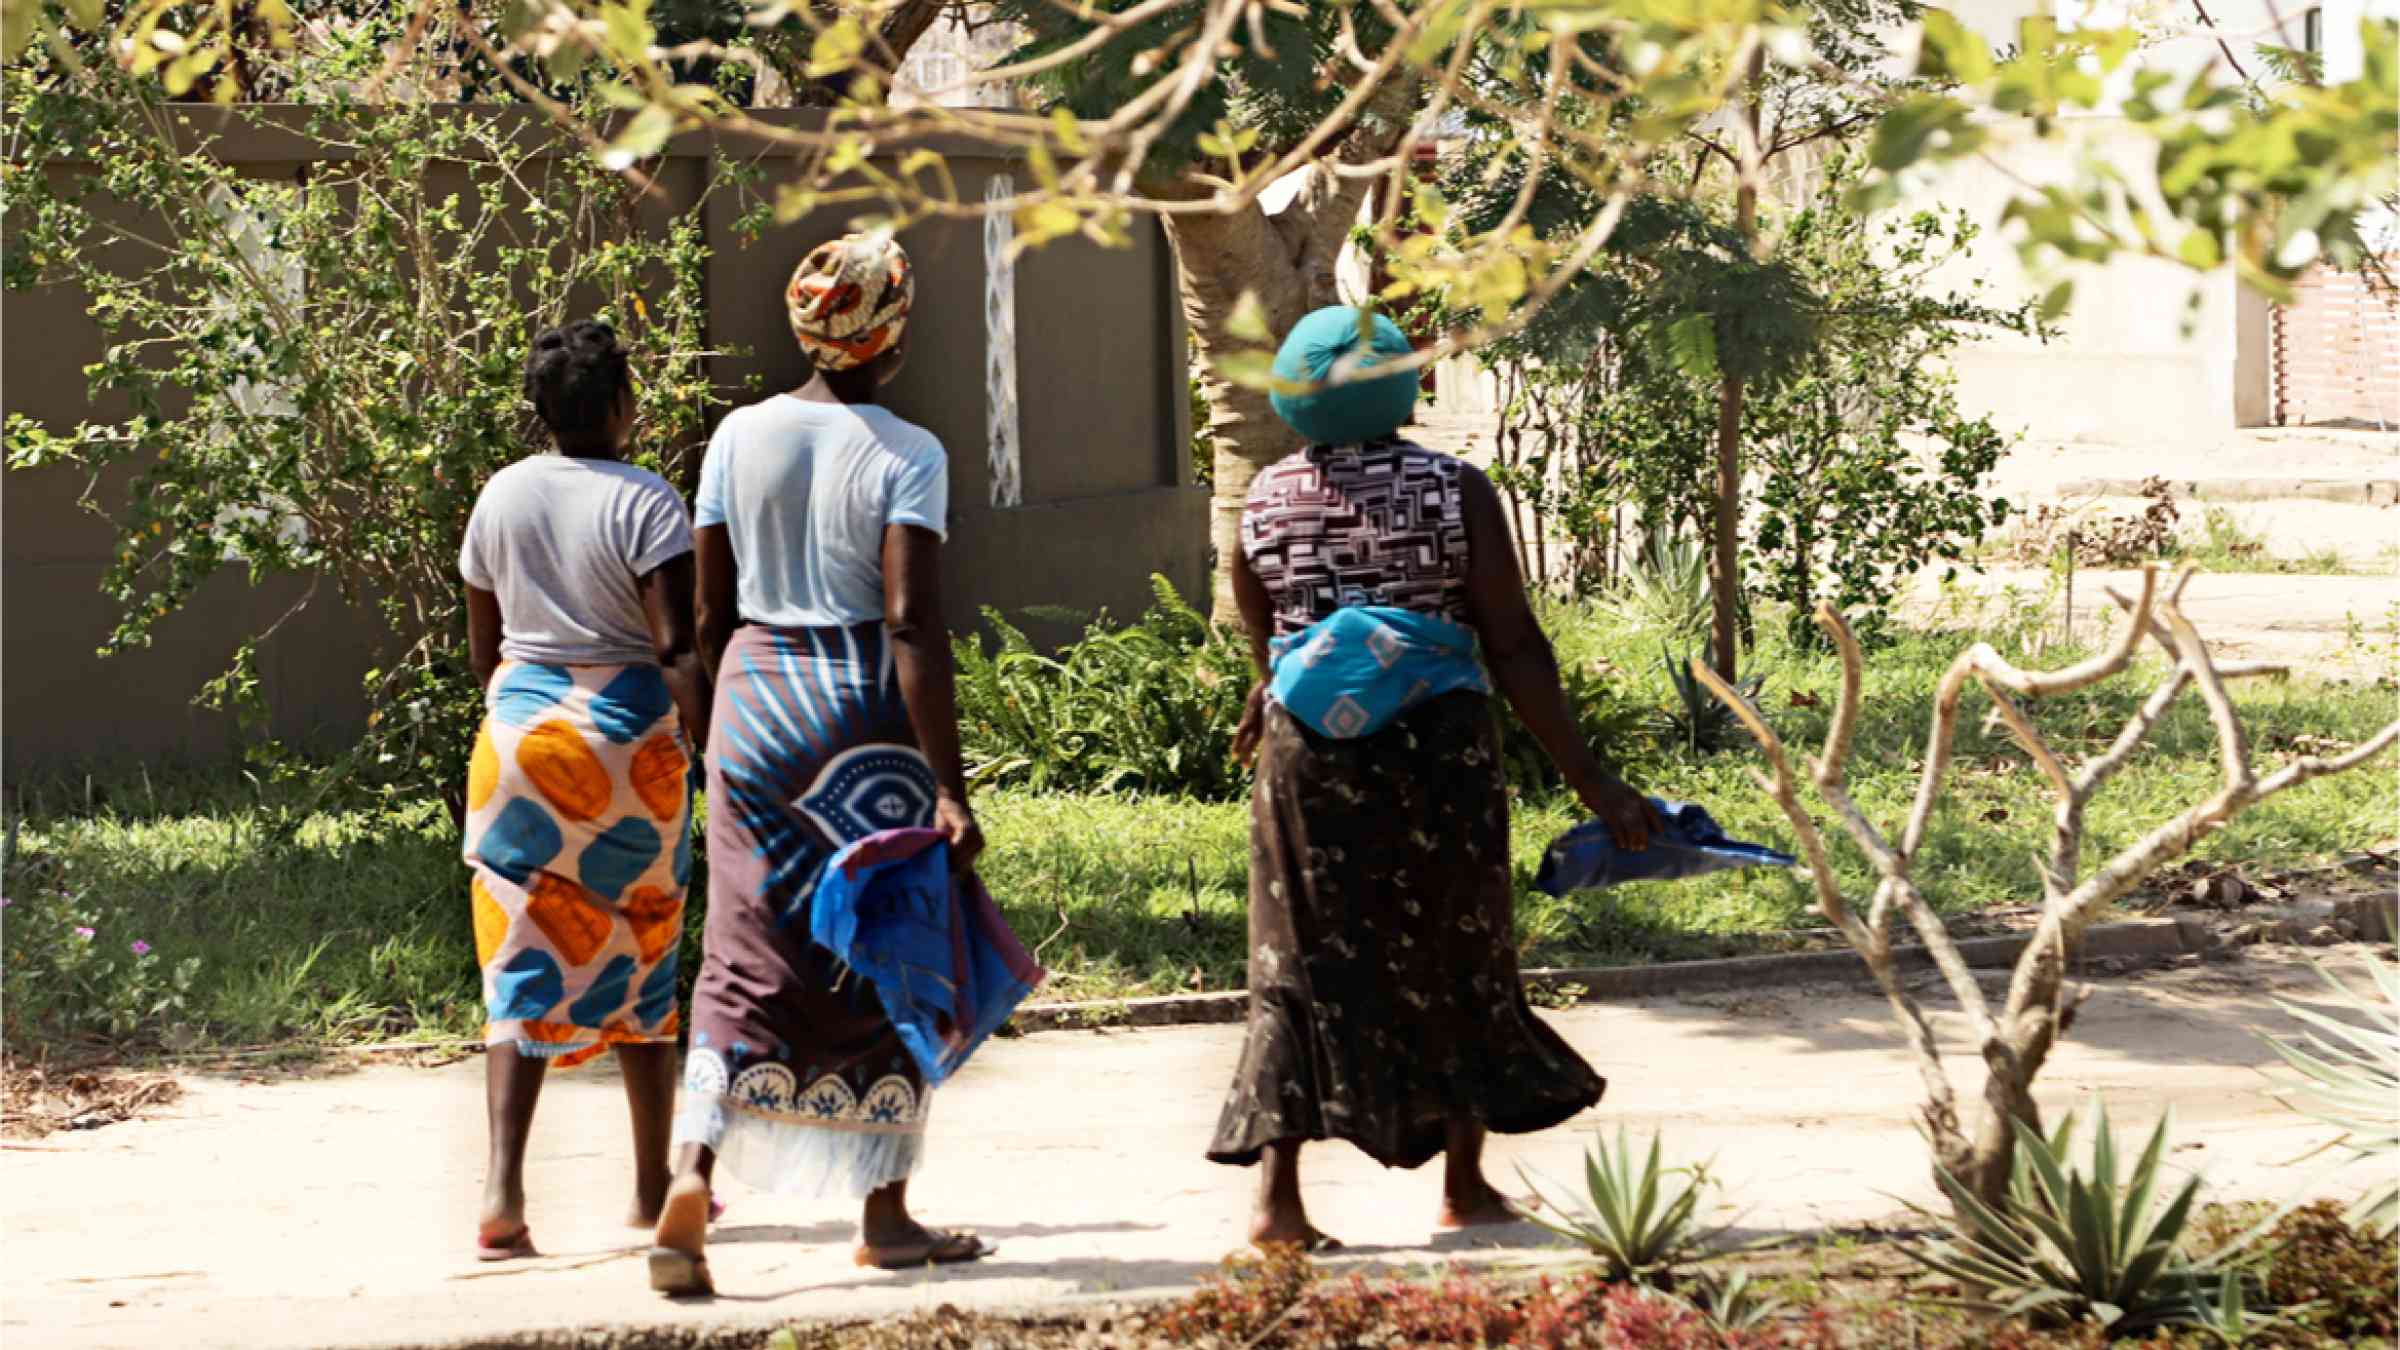 This image shows three women walking throught a green environment in the city of Beira in Mozambique.